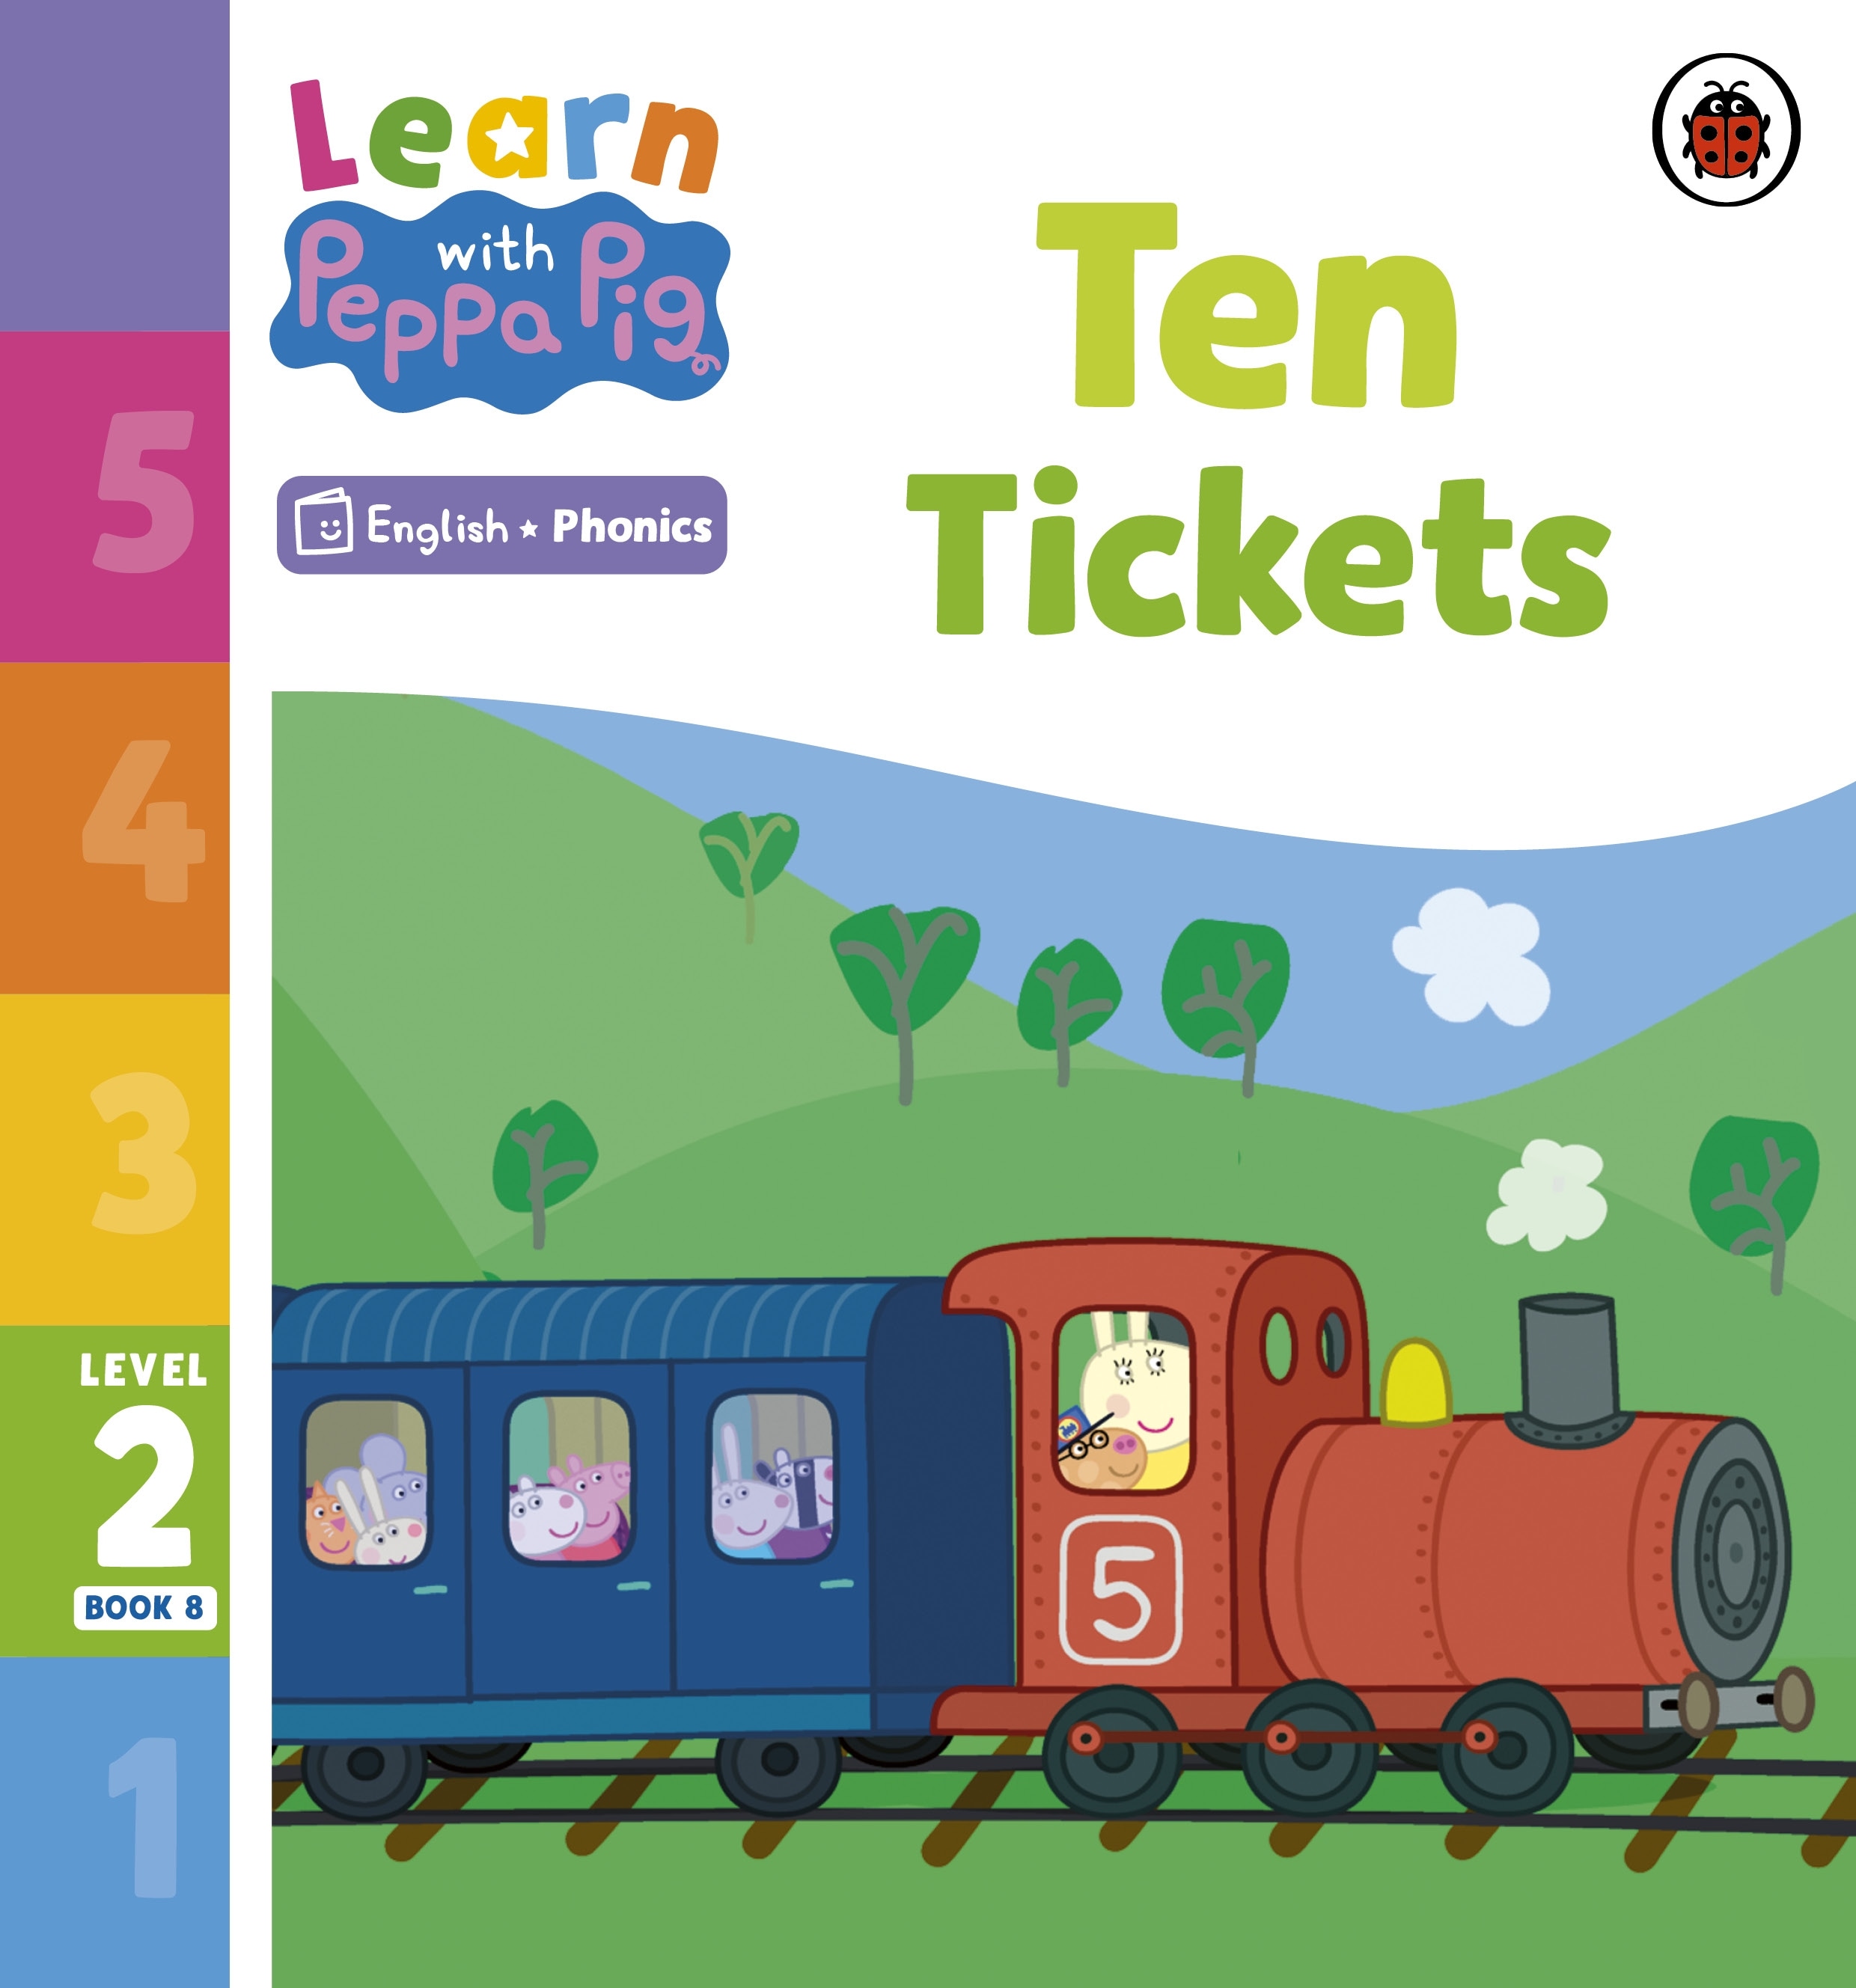 Book “Learn with Peppa Phonics Level 2 Book 8 — Ten Tickets (Phonics Reader)” by Peppa Pig — January 5, 2023